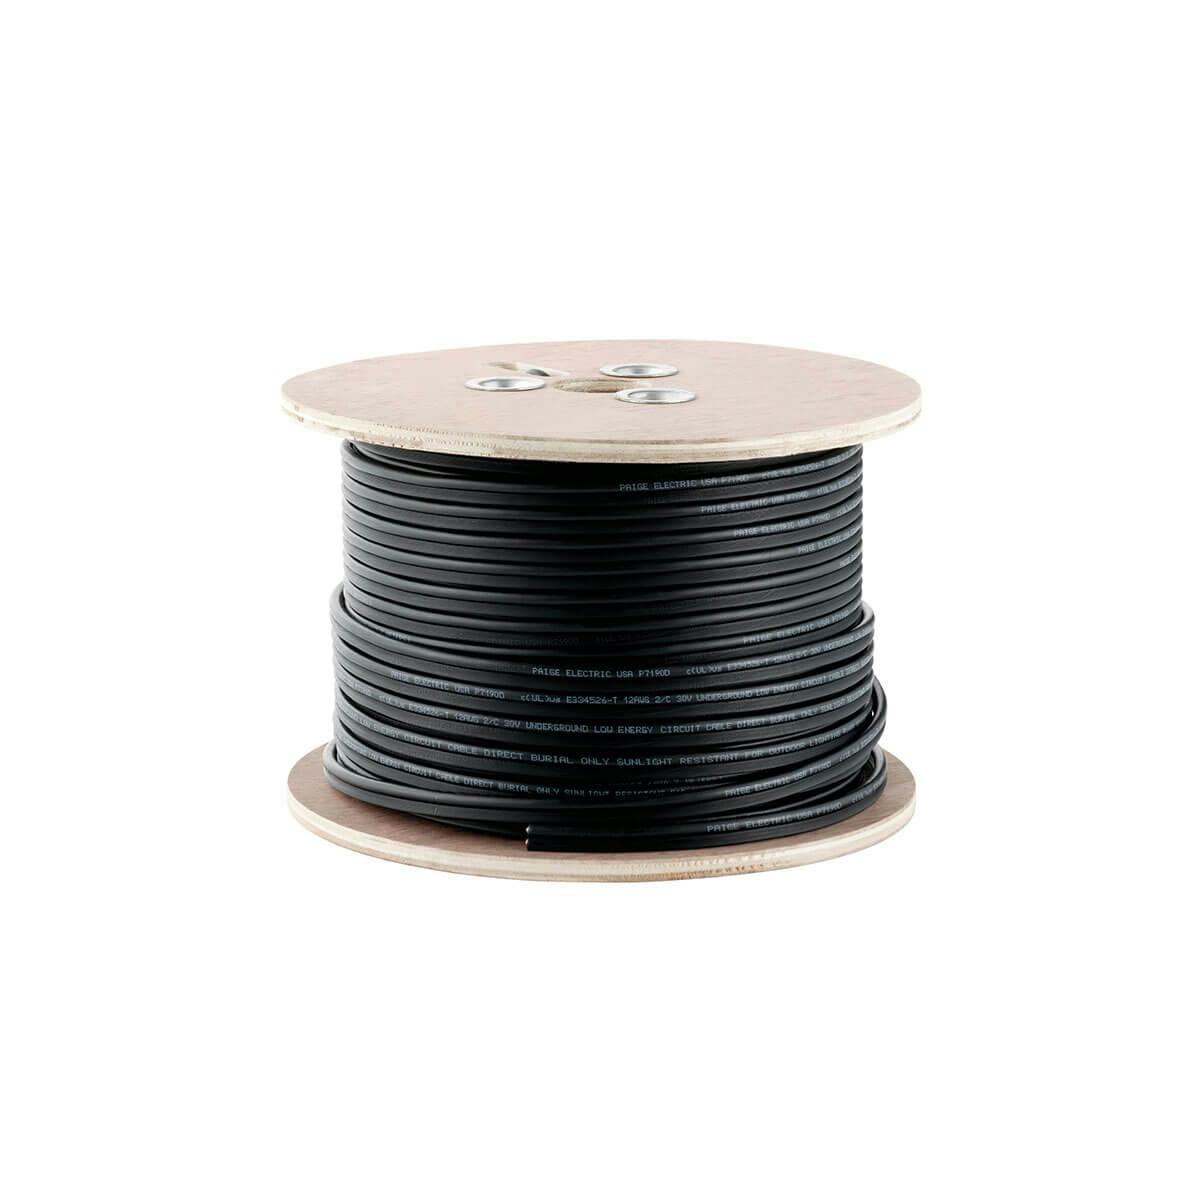 12 Gauge 250' Low Voltage Cable Black on a white background